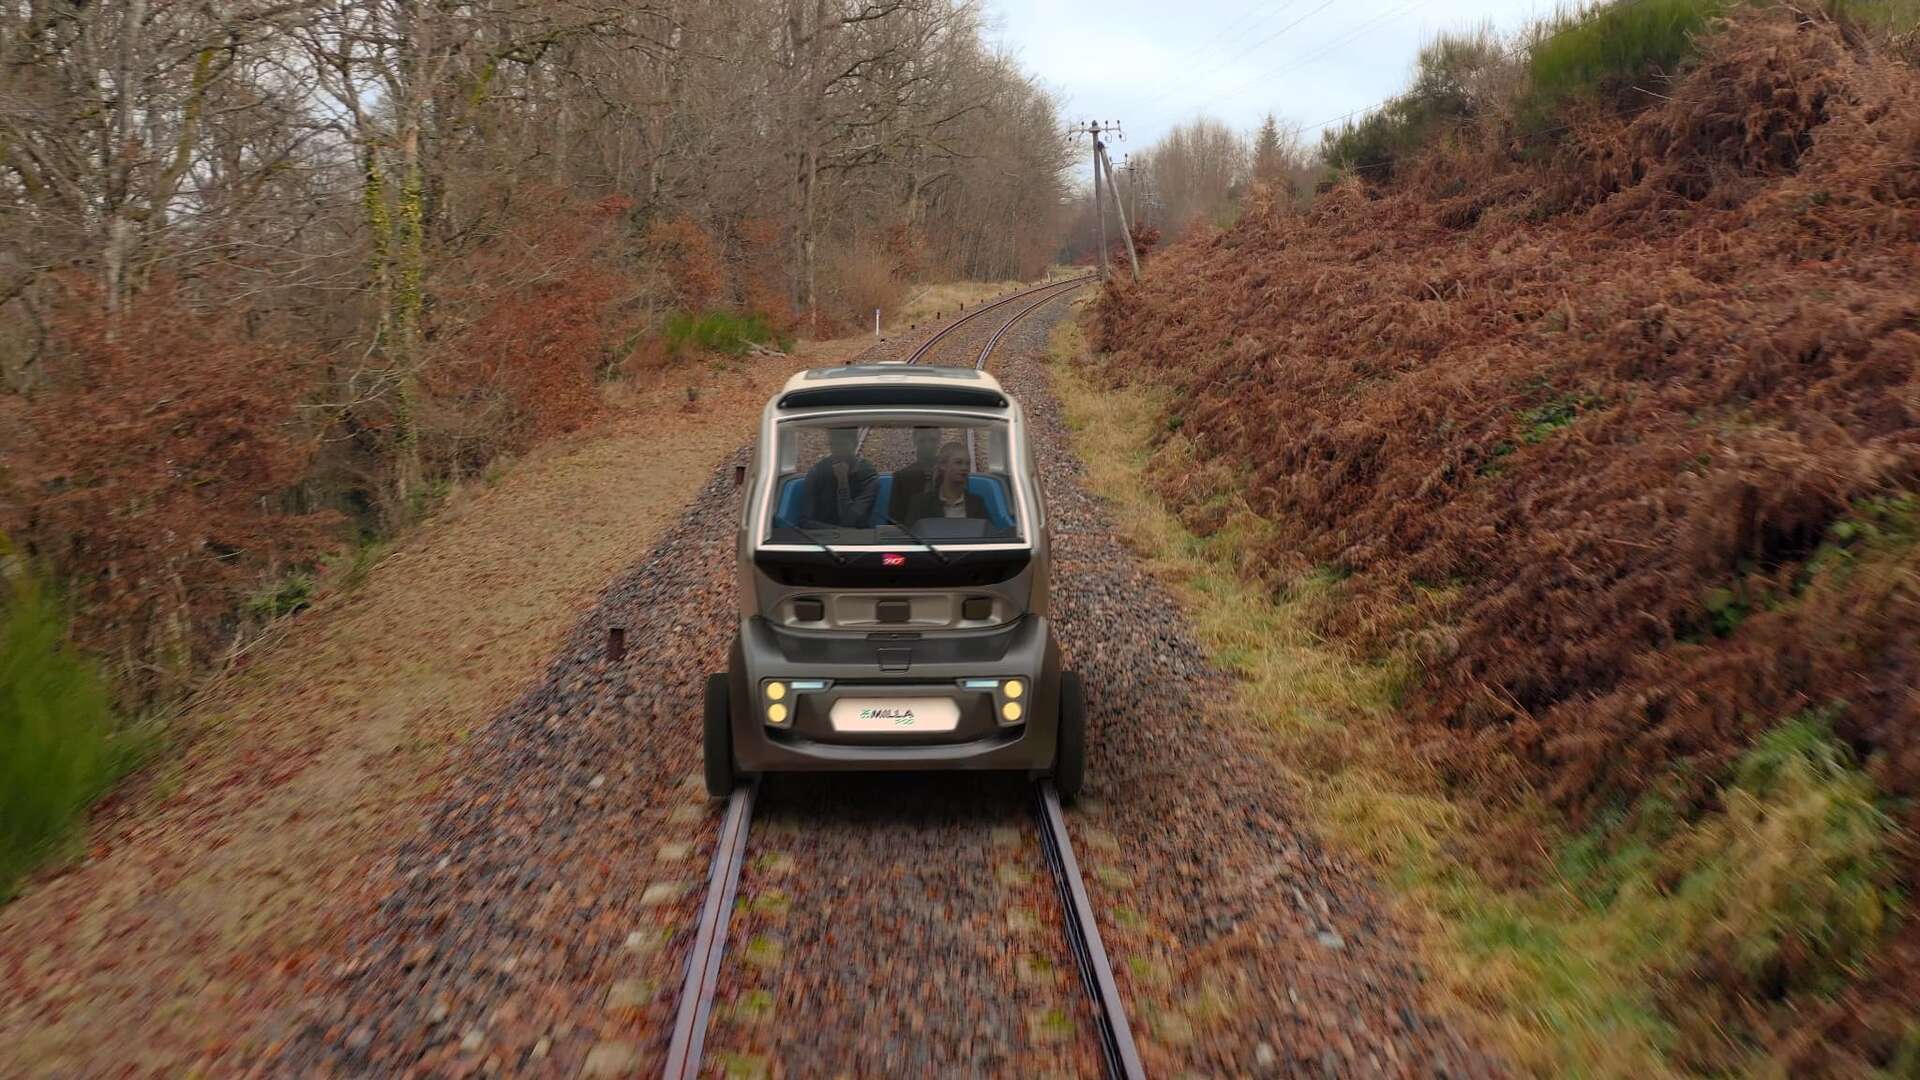 An electric car running on railways in the underprivileged regions of France